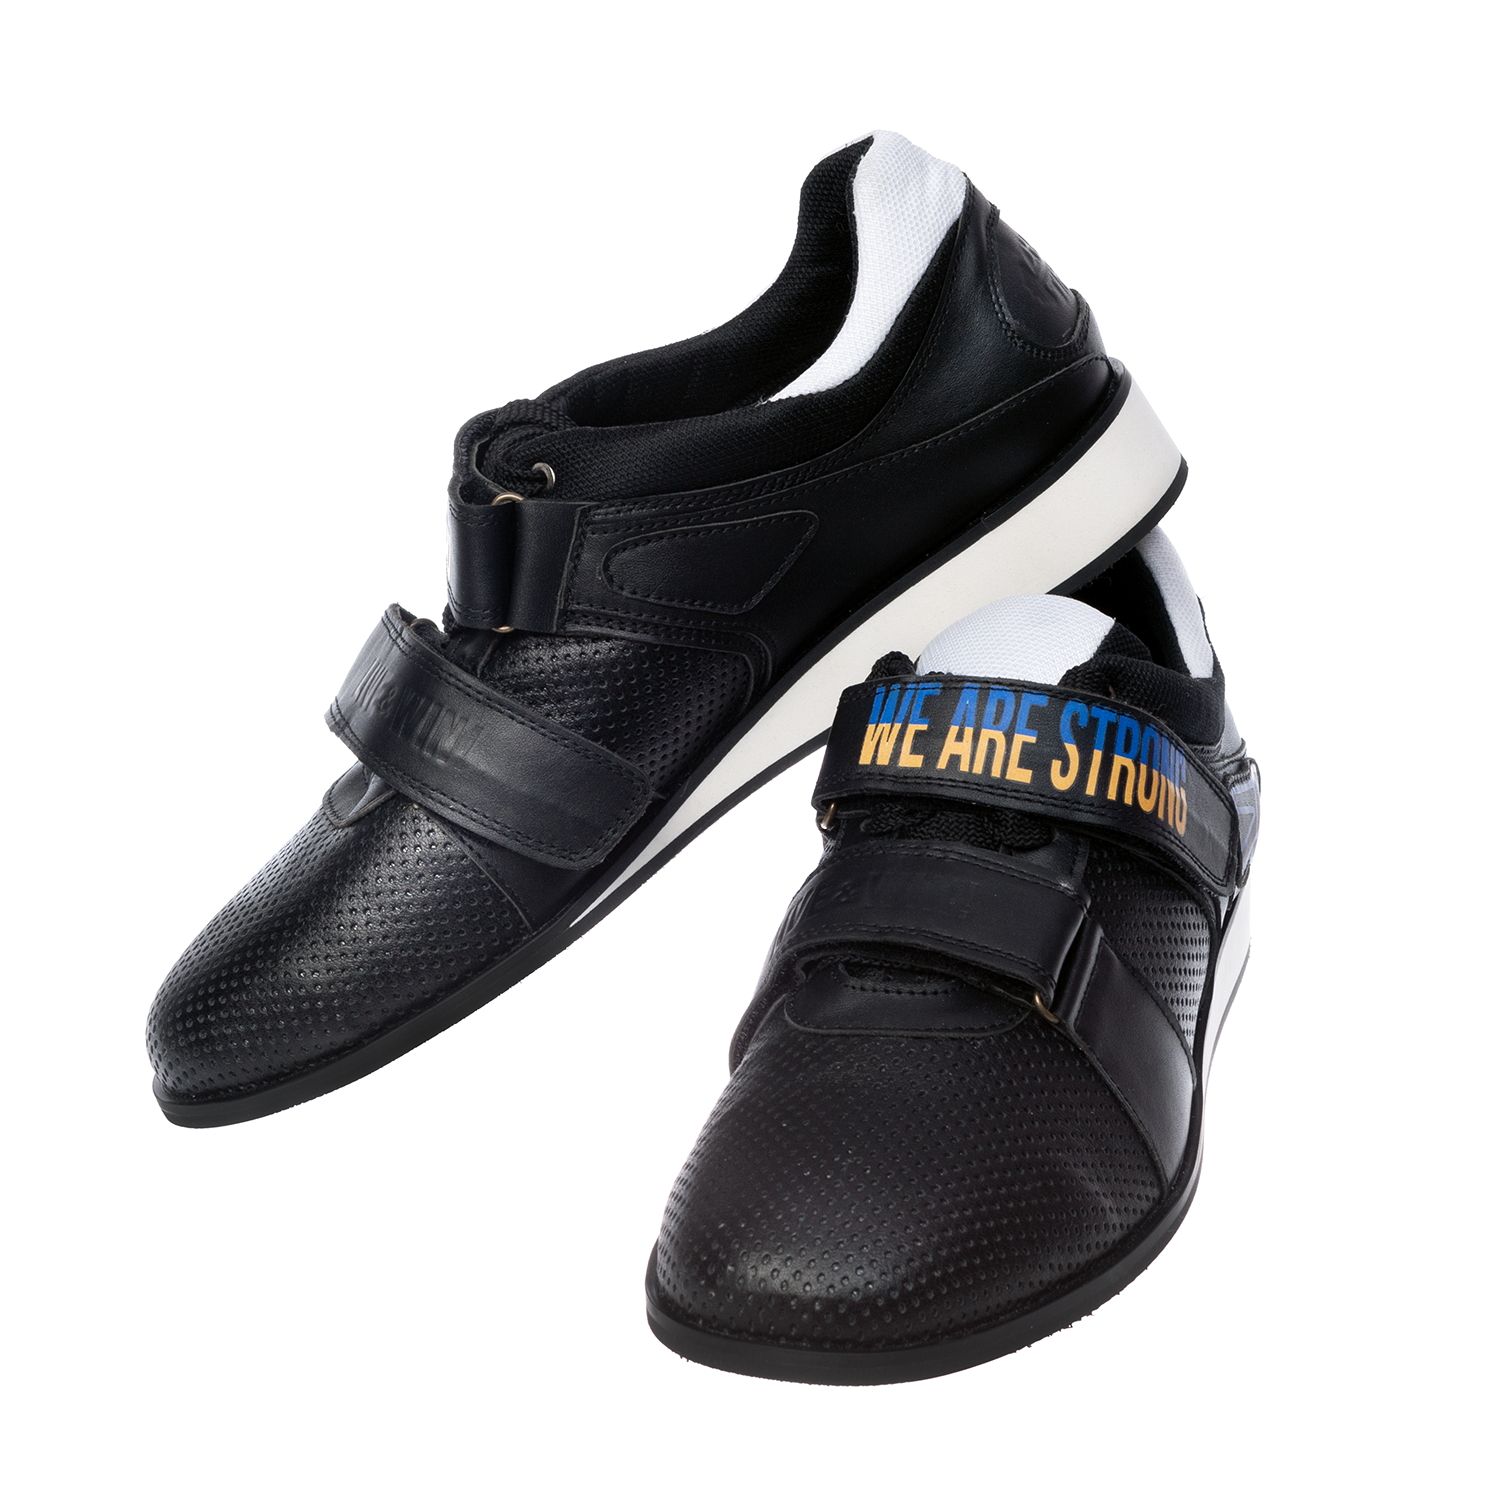 Weightlifting shoes  We are strong, black, size 39 (UKR)